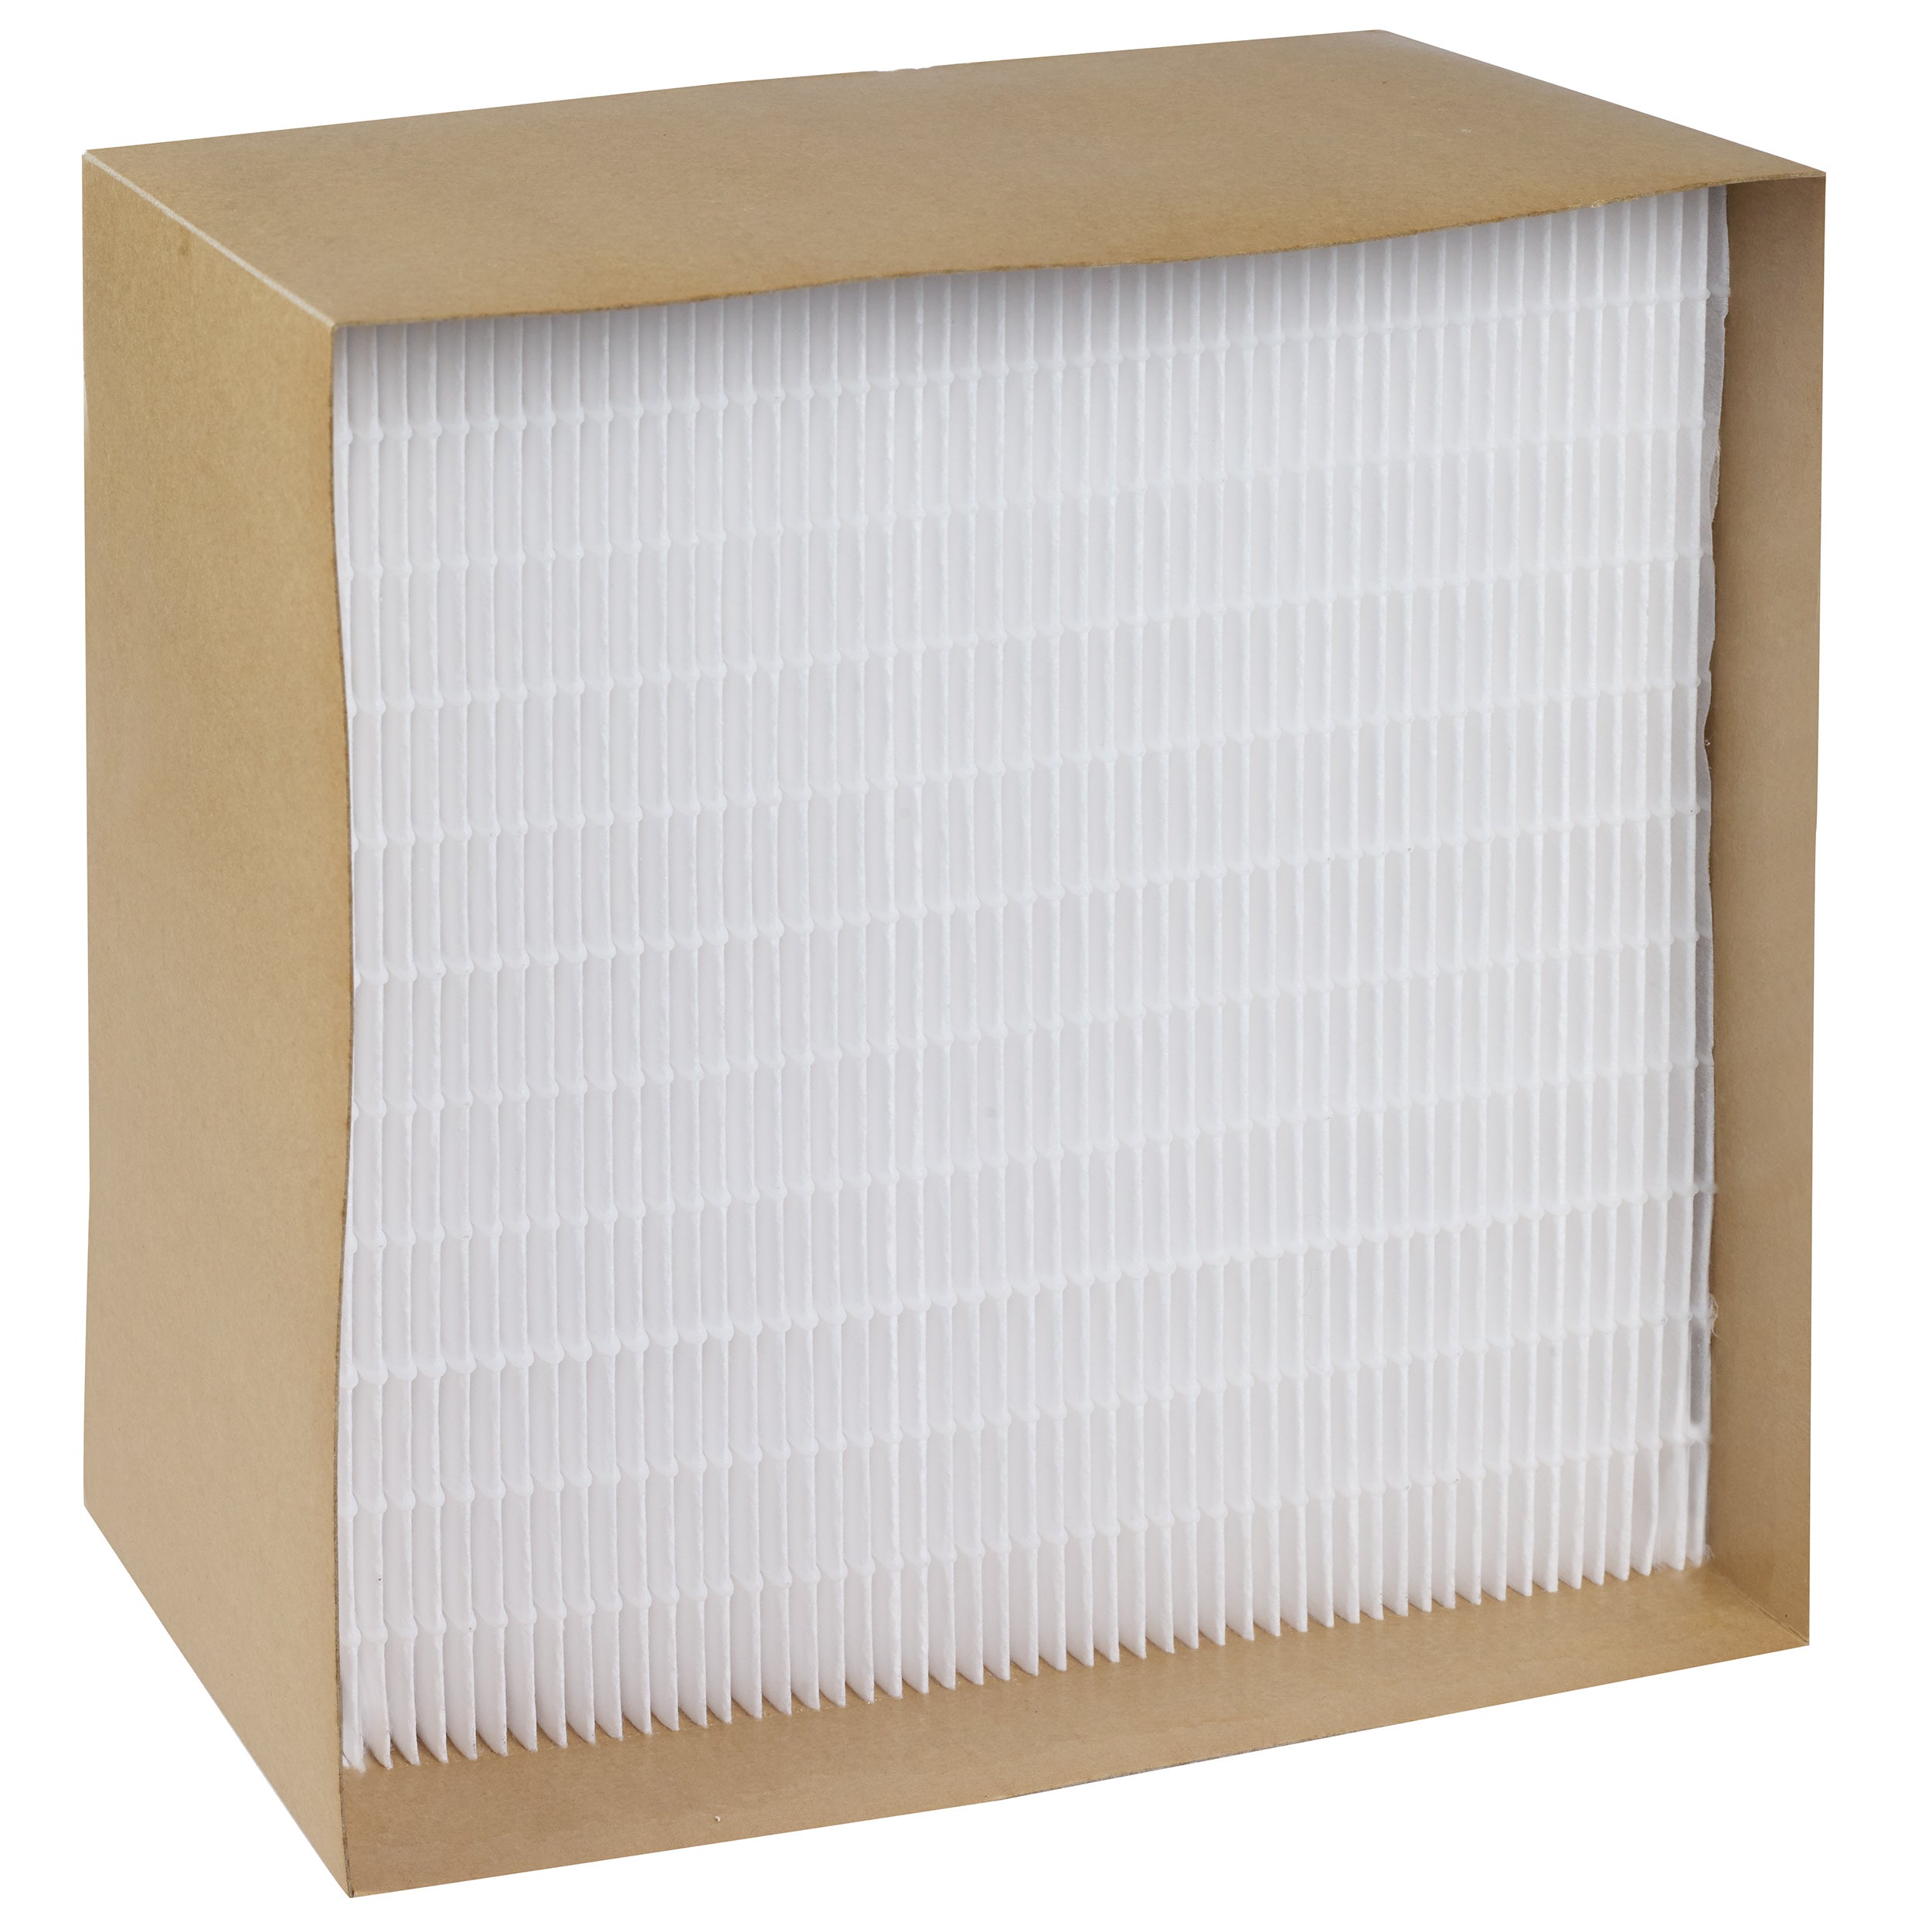 Back in stock $58 smartvent filters